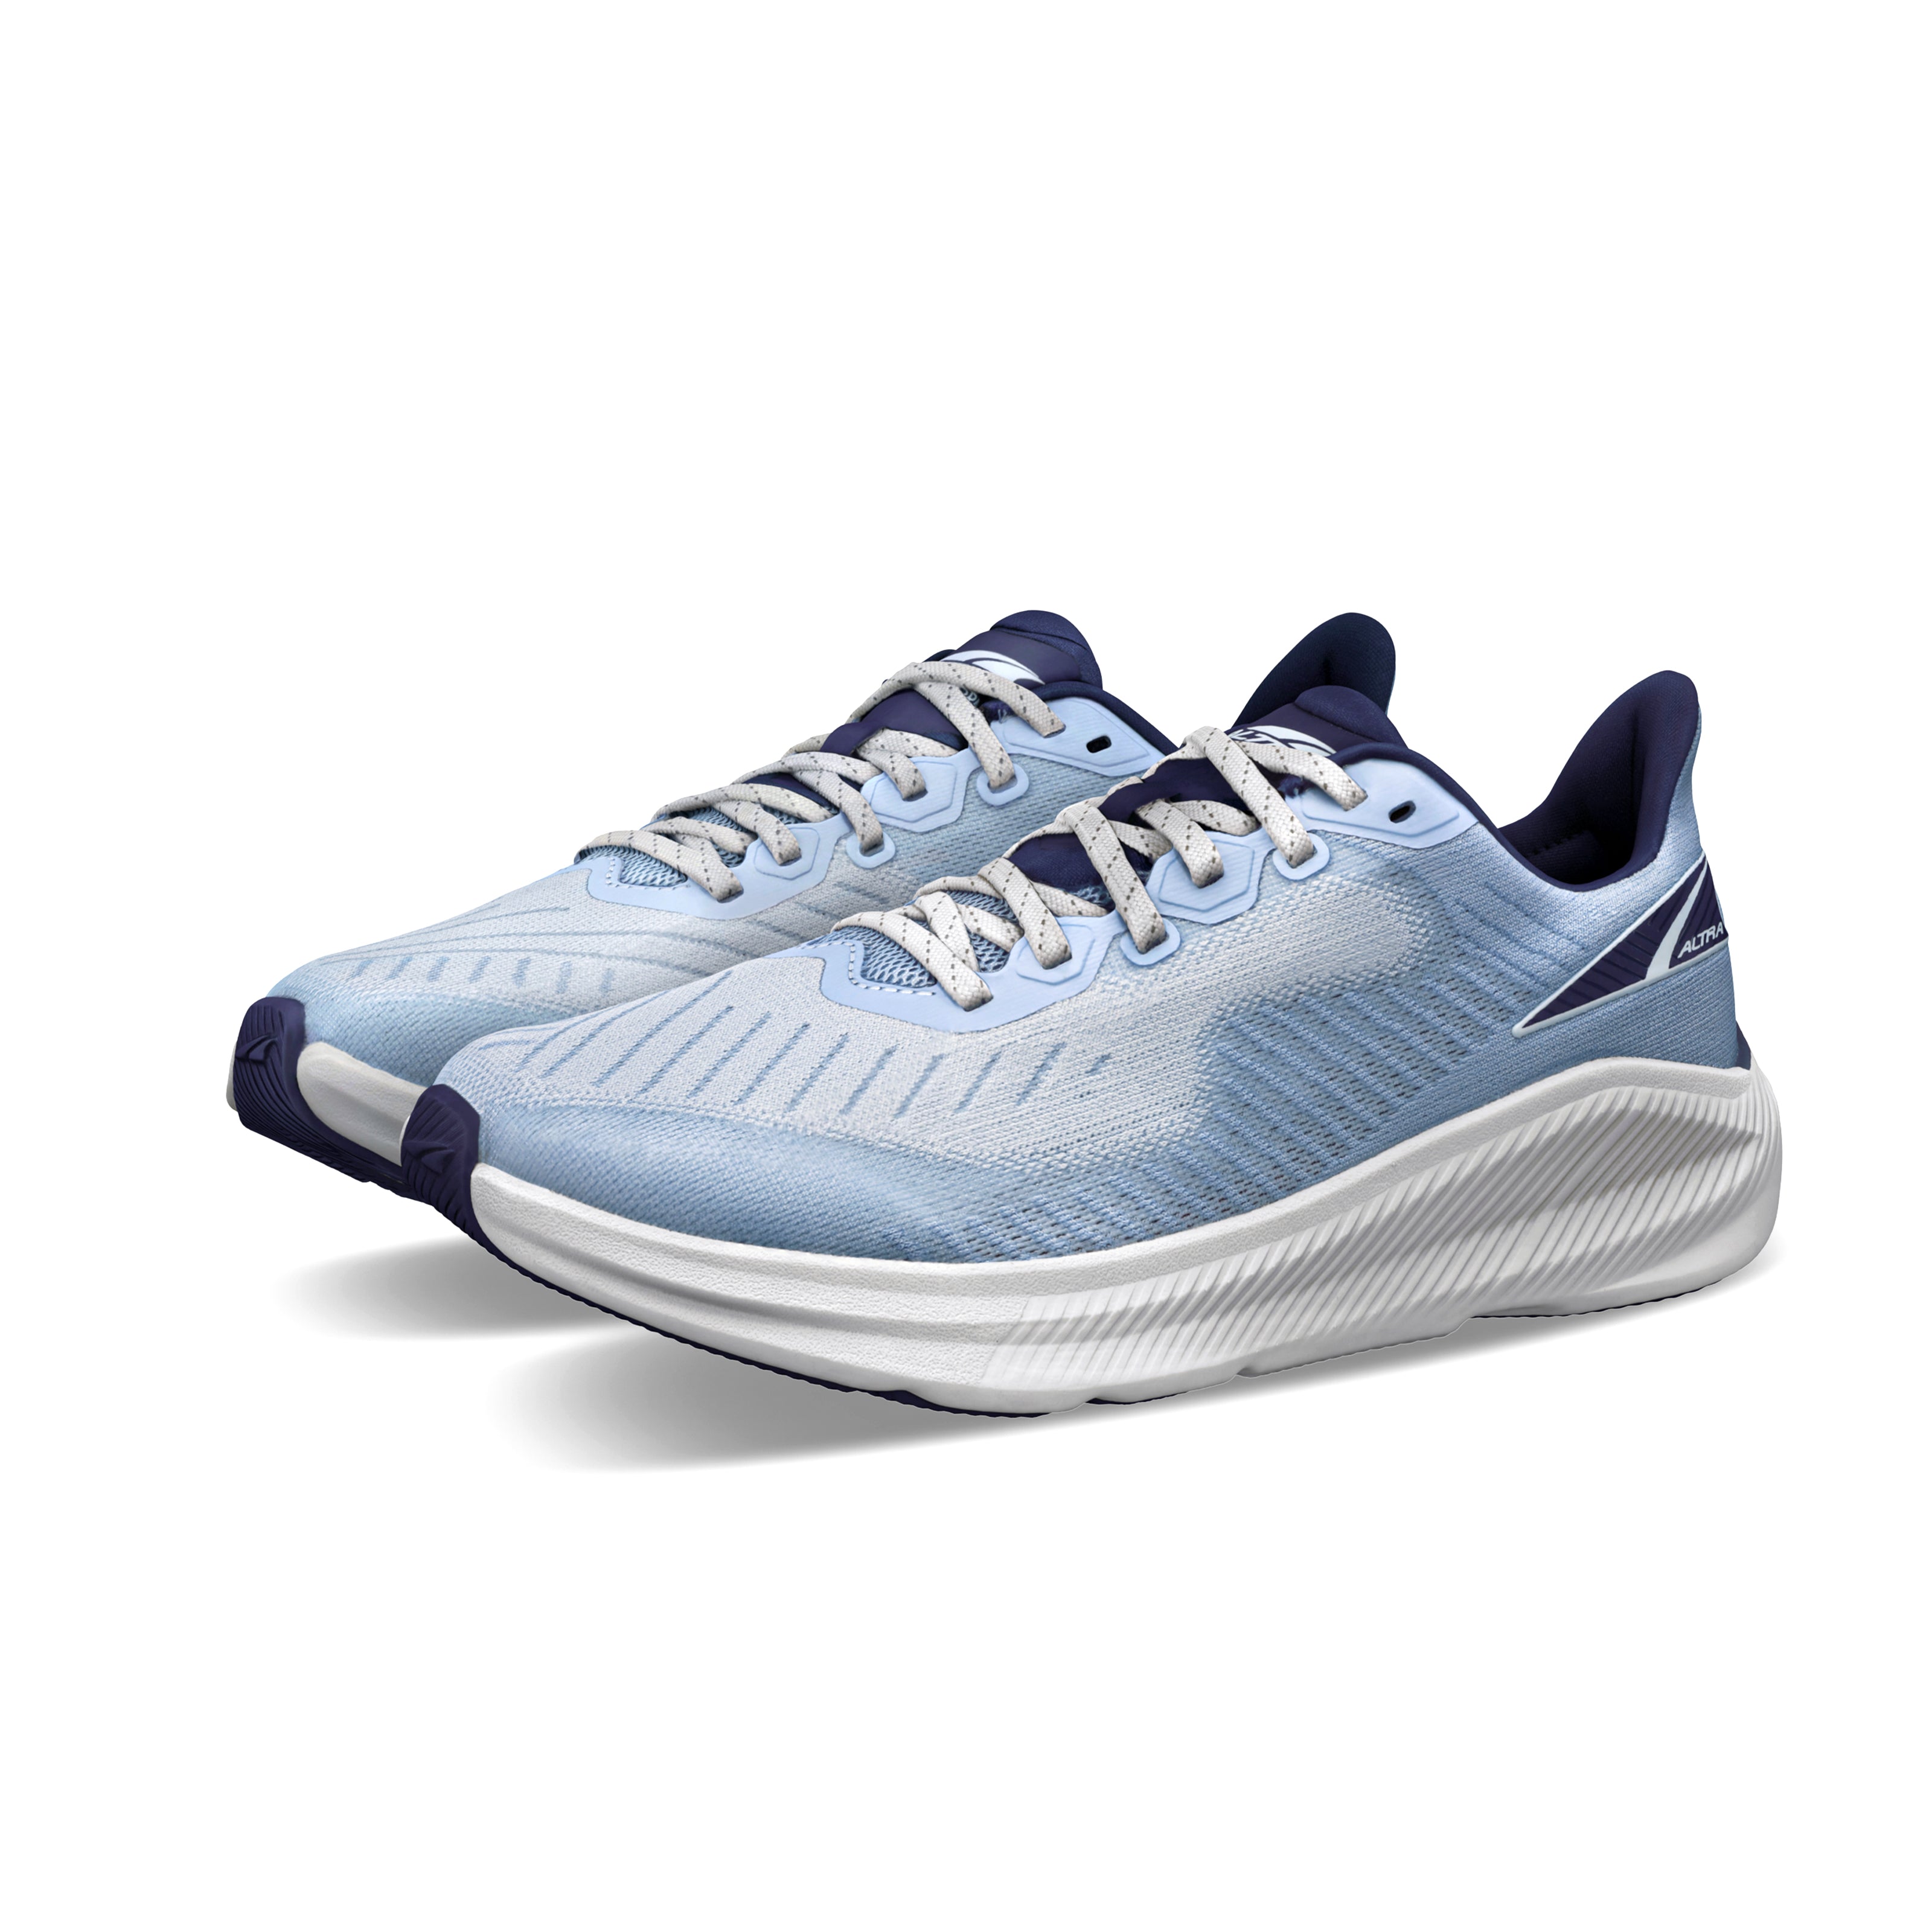 ALTRA WOMEN'S EXPERIENCE FORM - B - 420 BLUE/GRAY 